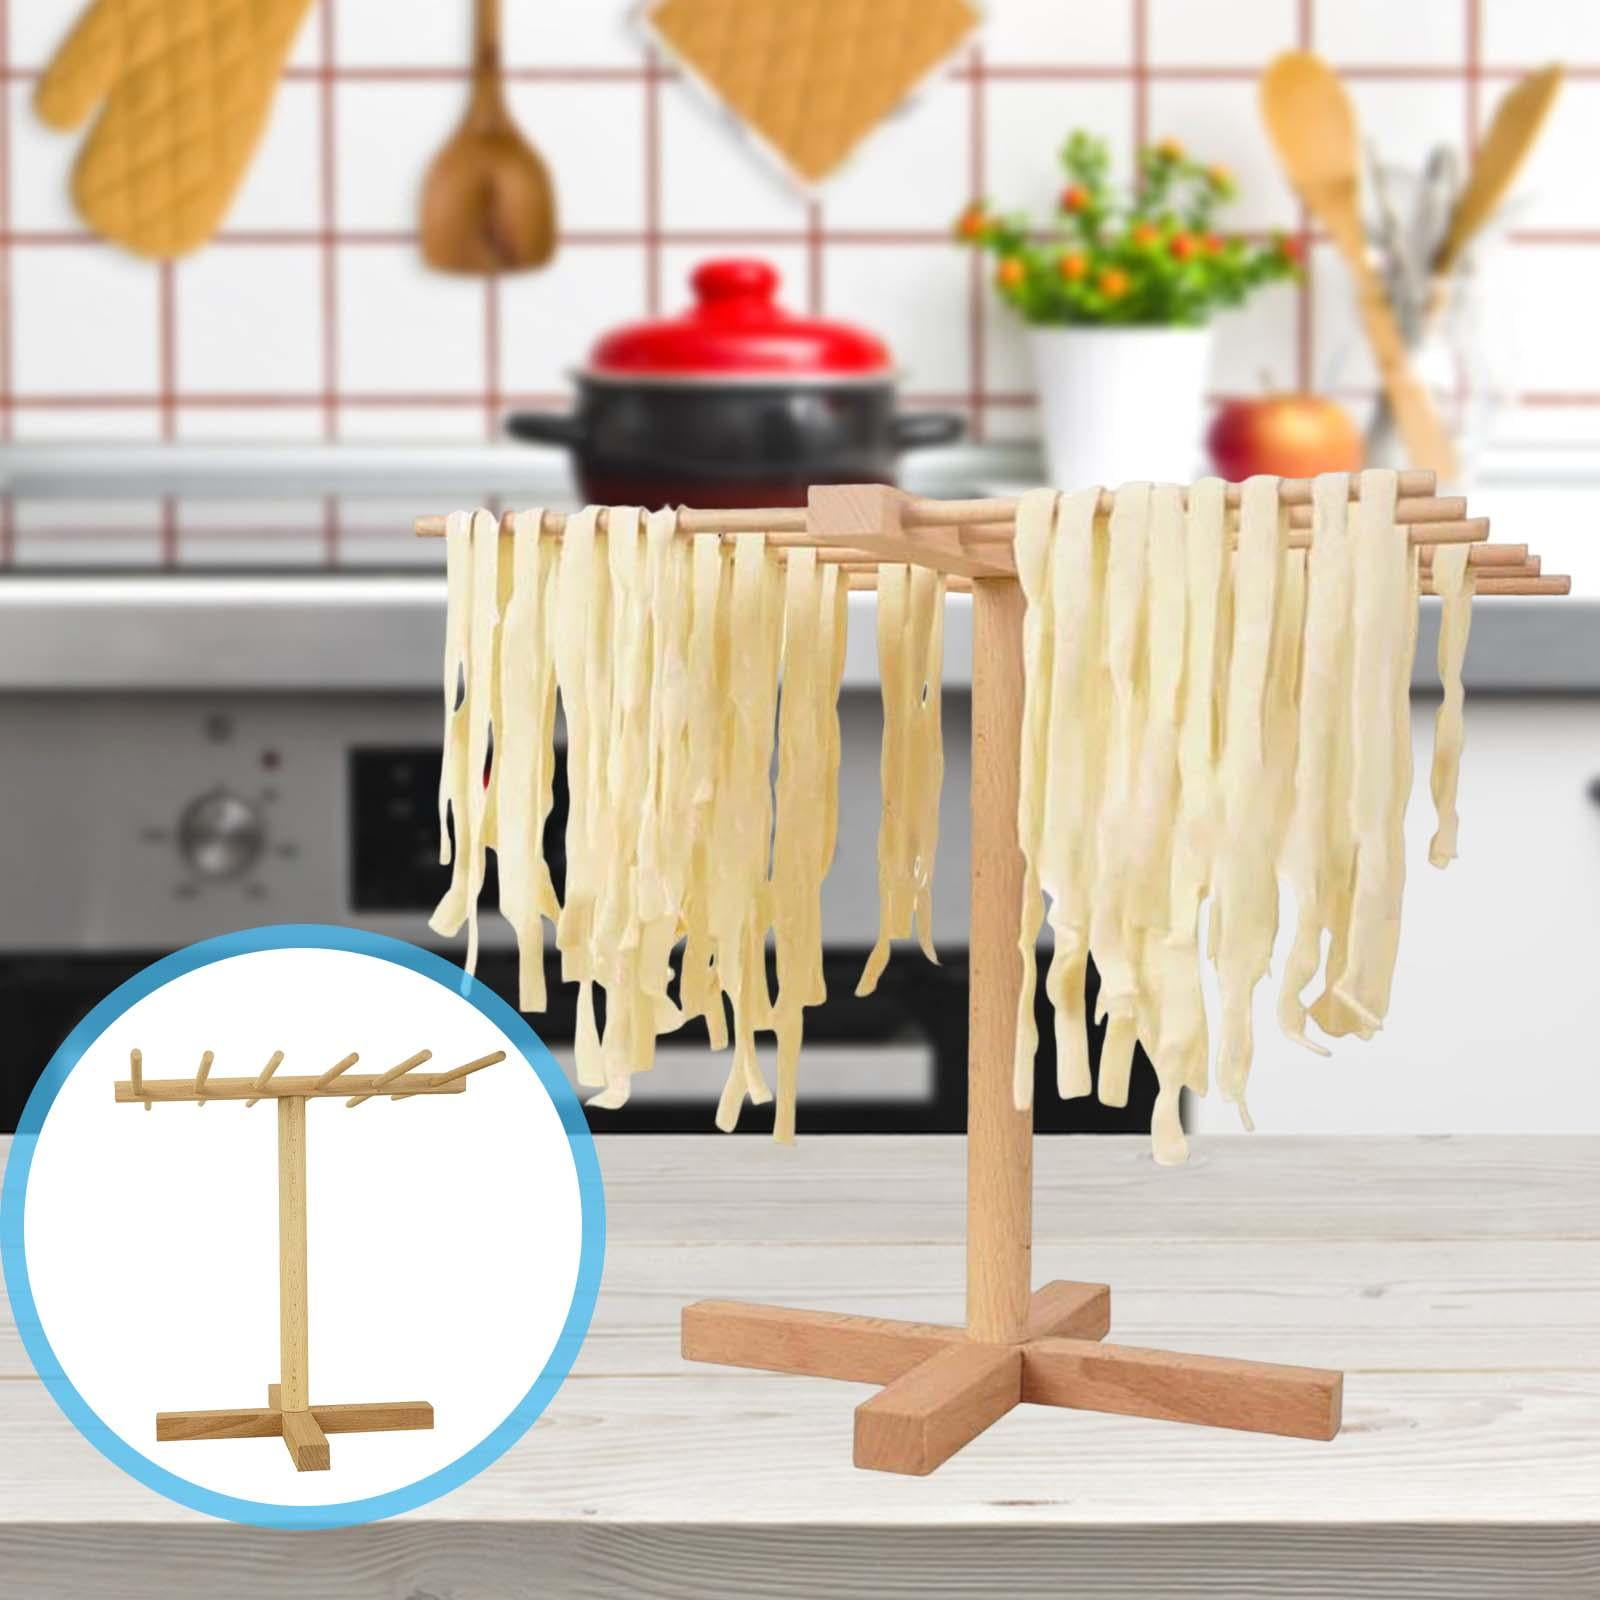 Wood Collapsible Homemade Household Noodle Dryer Rack Hanging Pasta Drying  Rack for Home Kitchen